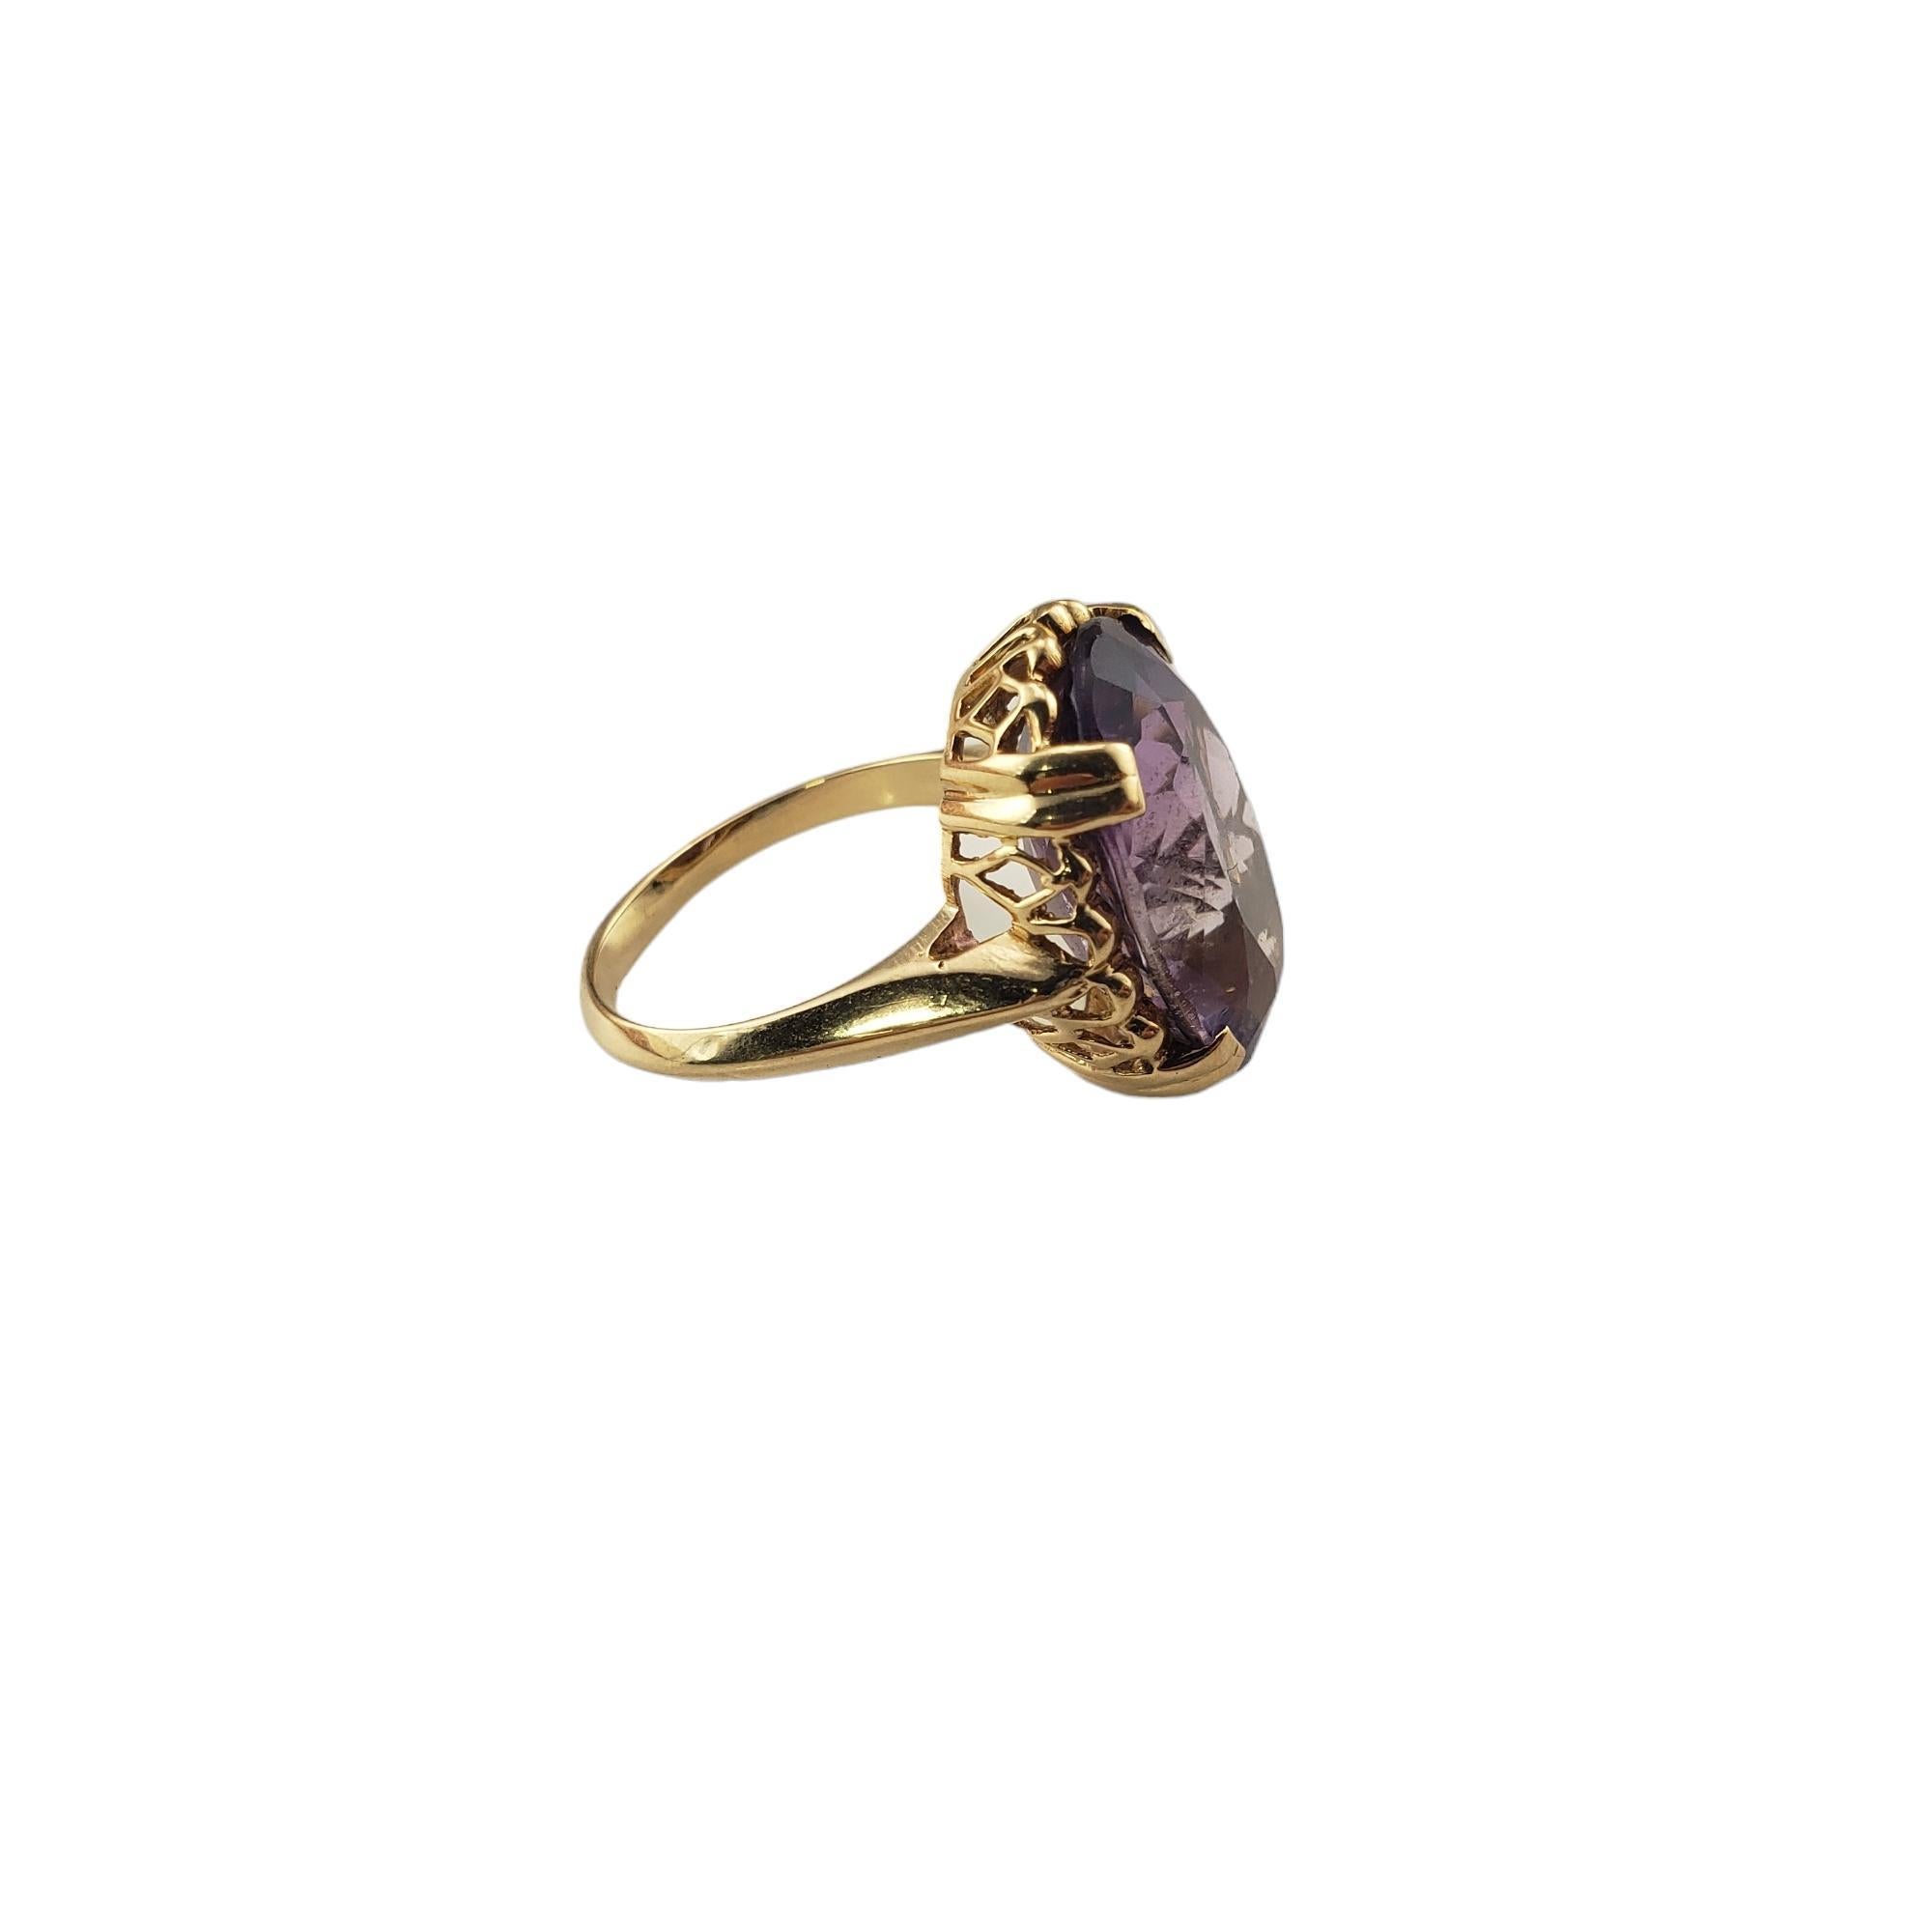  14K Yellow Gold Amethyst Ring Size 6.75 #15468 In Good Condition For Sale In Washington Depot, CT